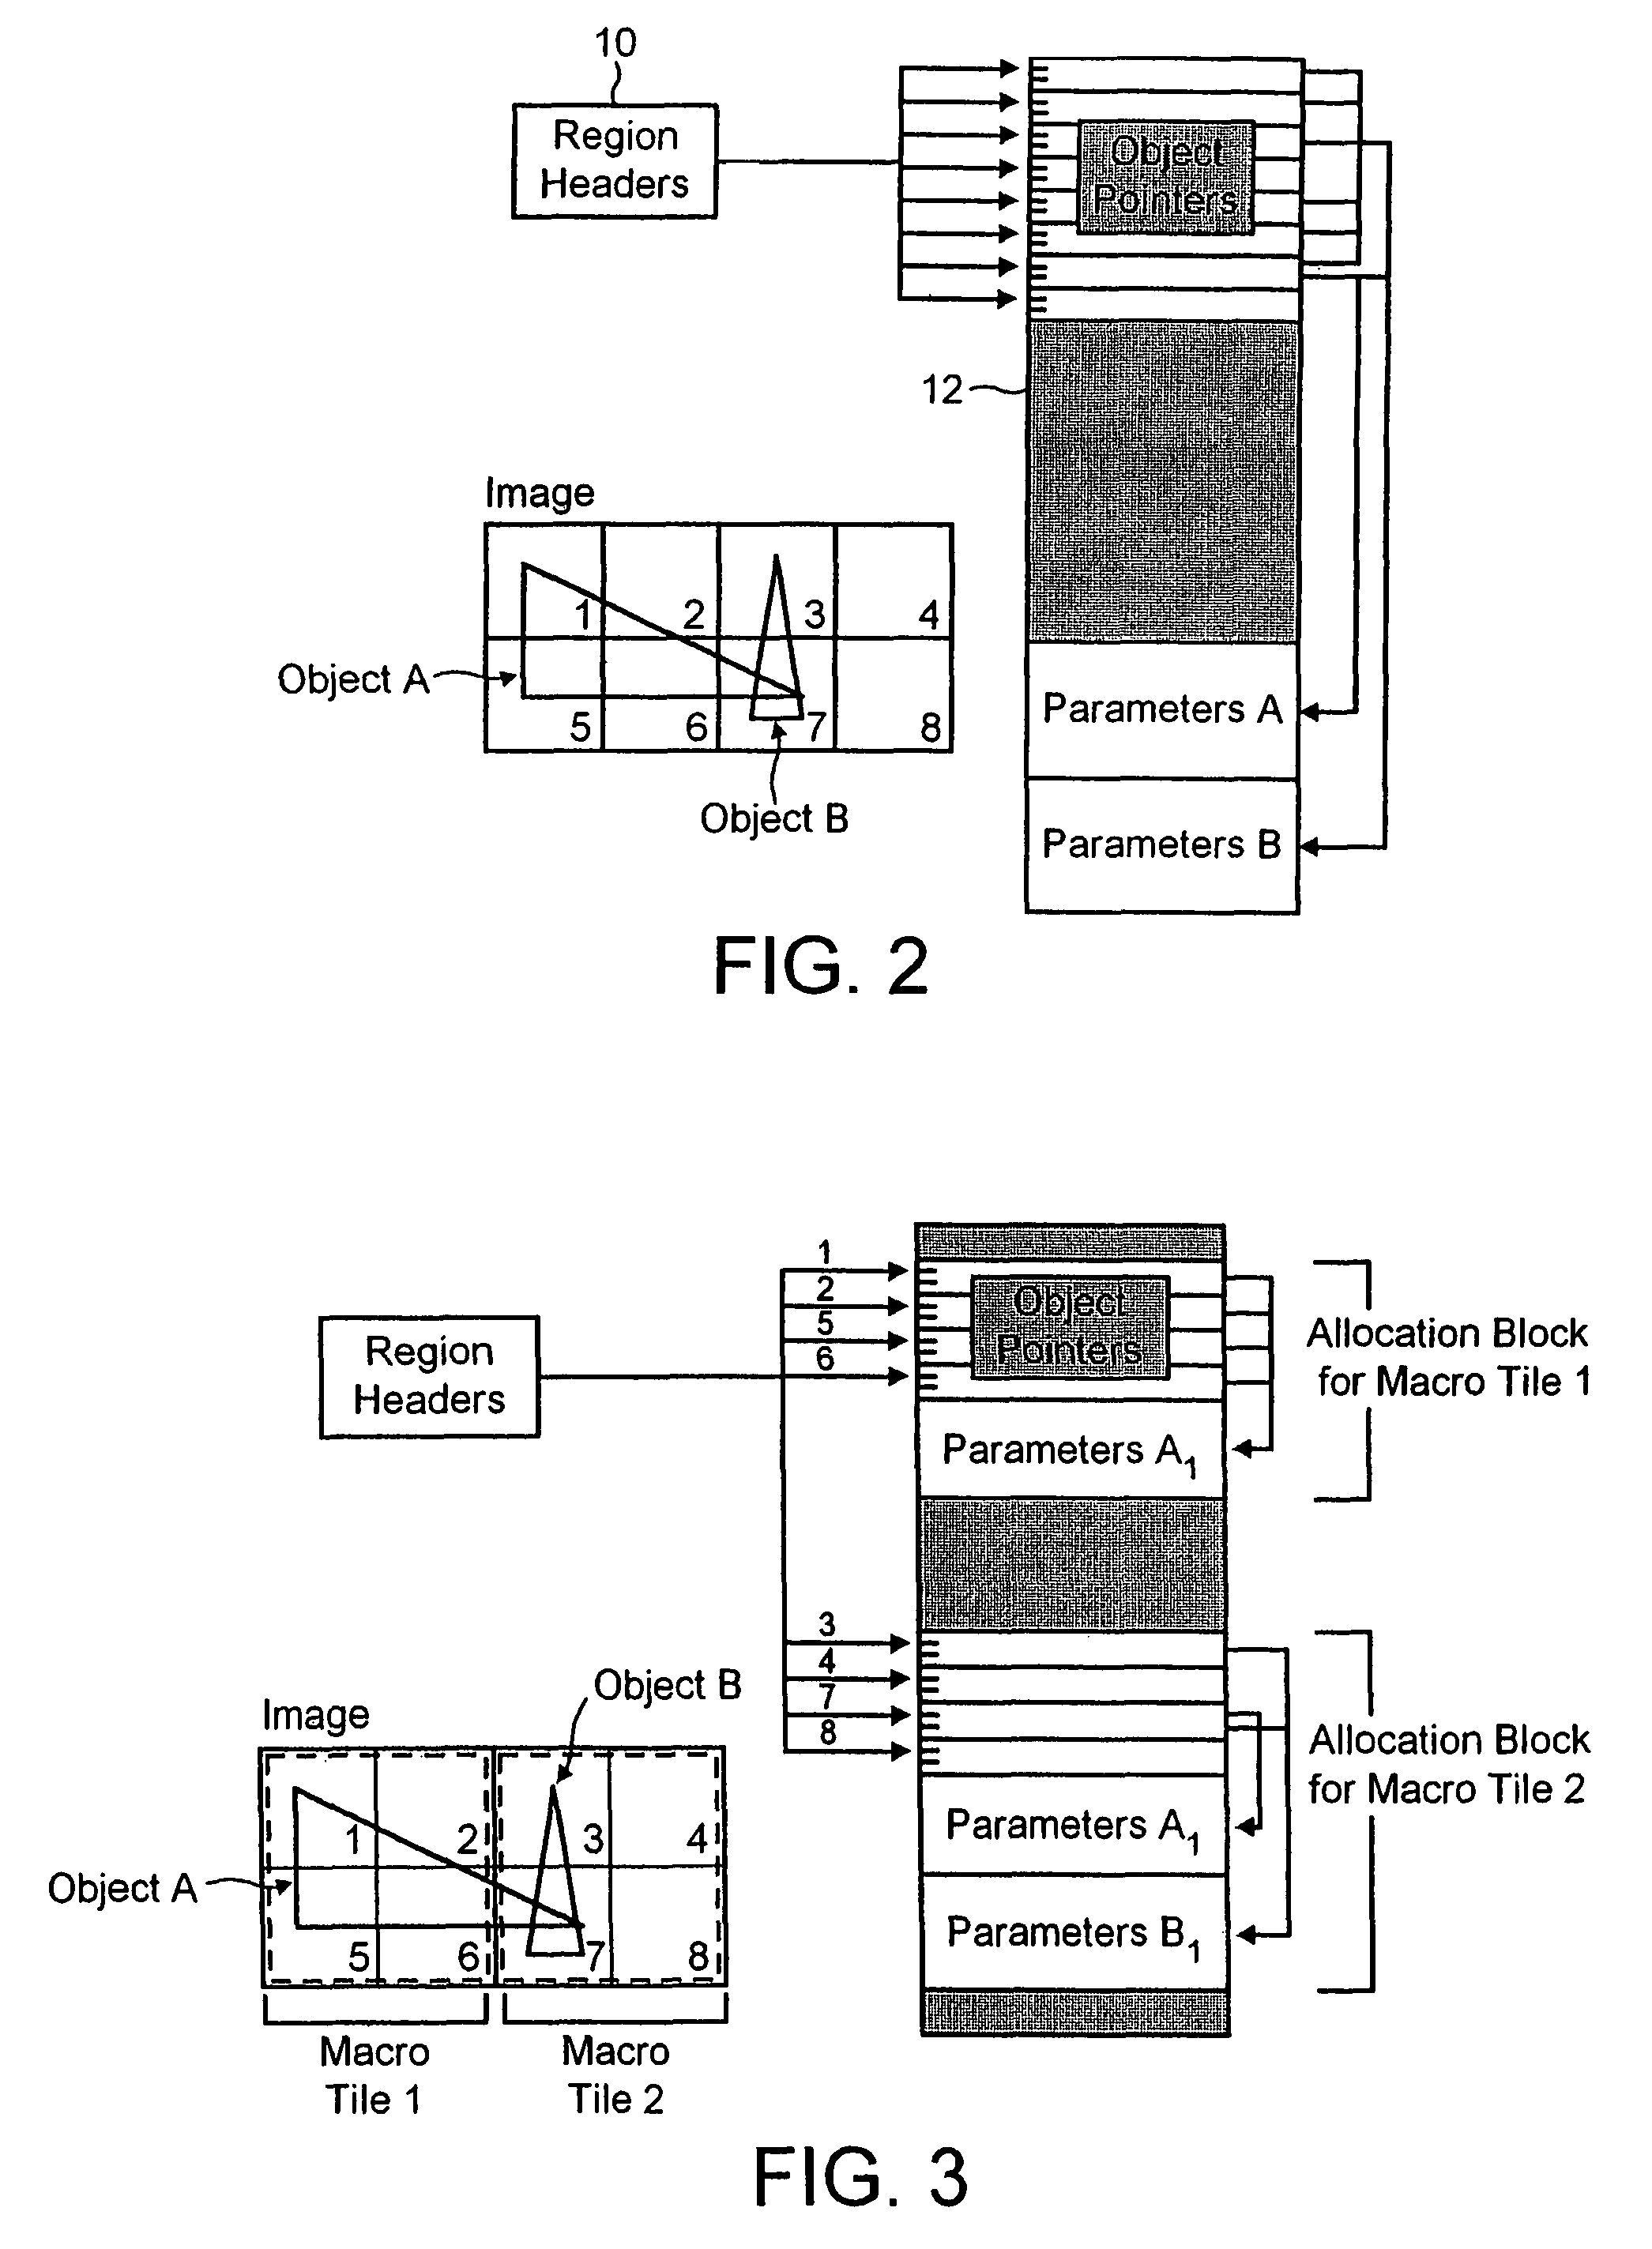 Memory management for systems for generating 3-dimensional computer images